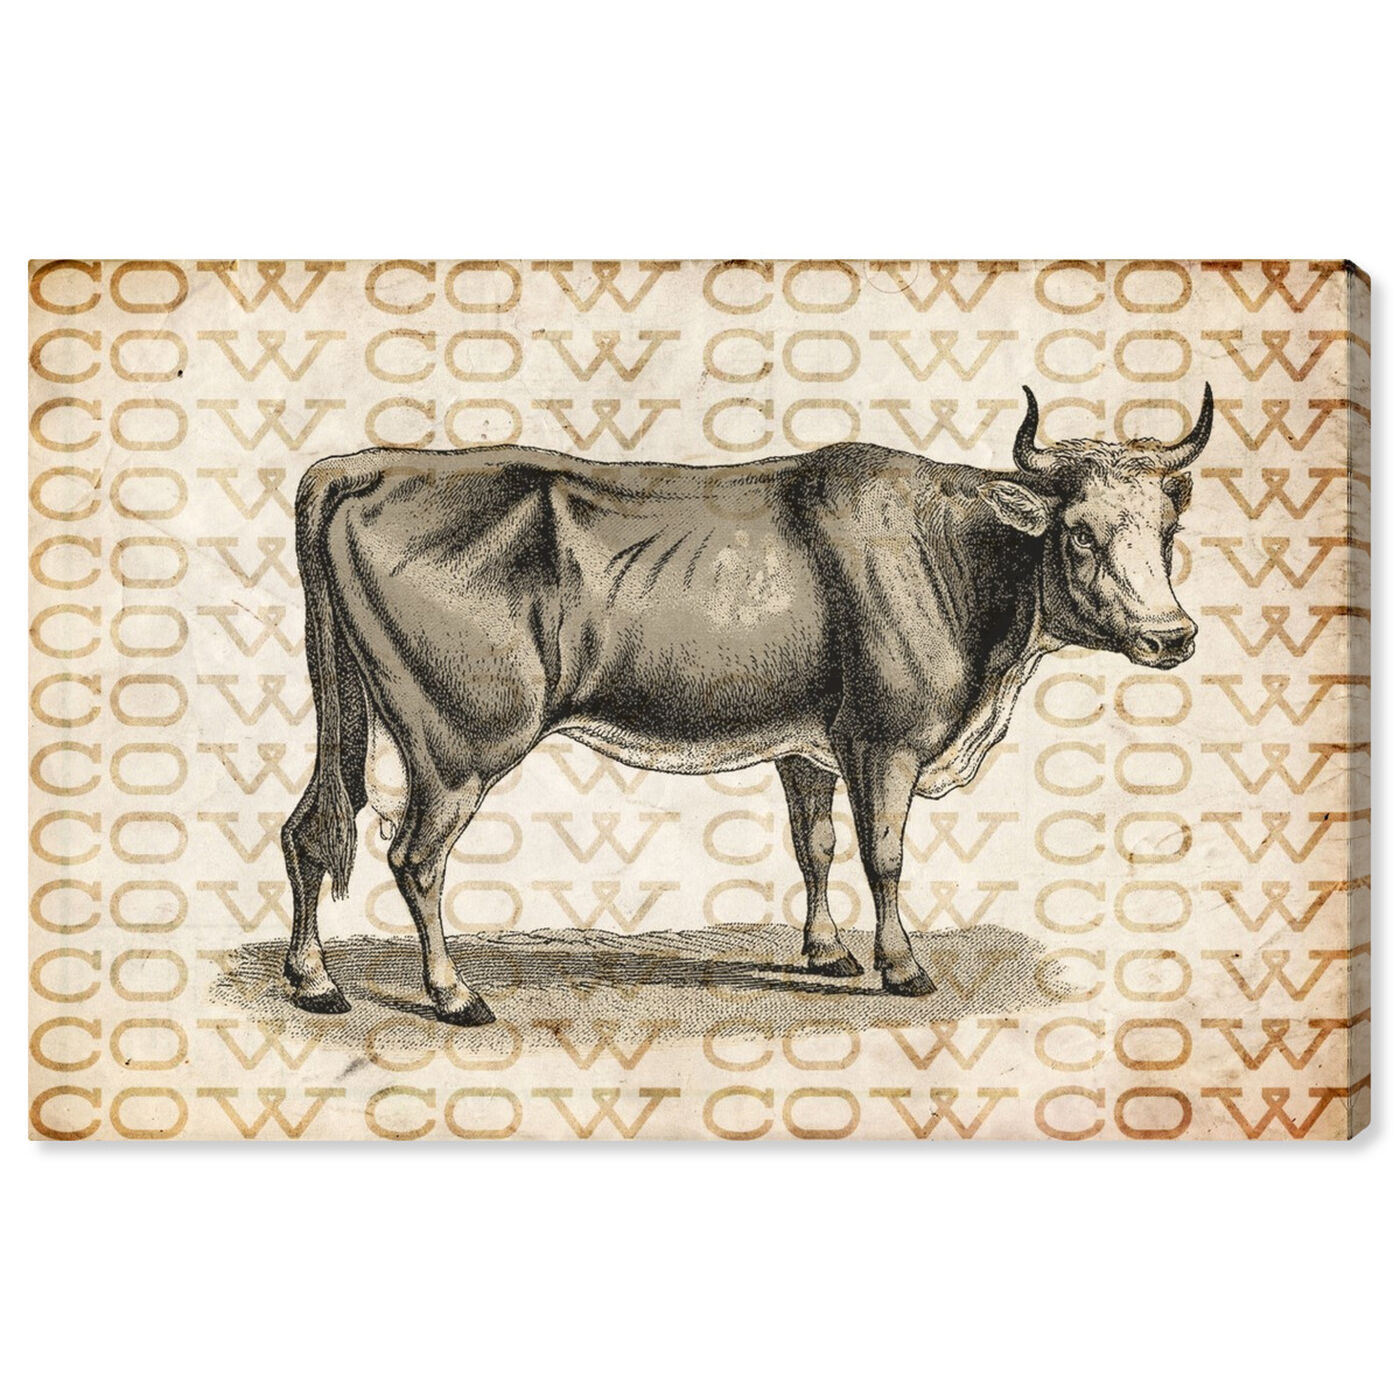 Front view of Cow featuring animals and farm animals art.